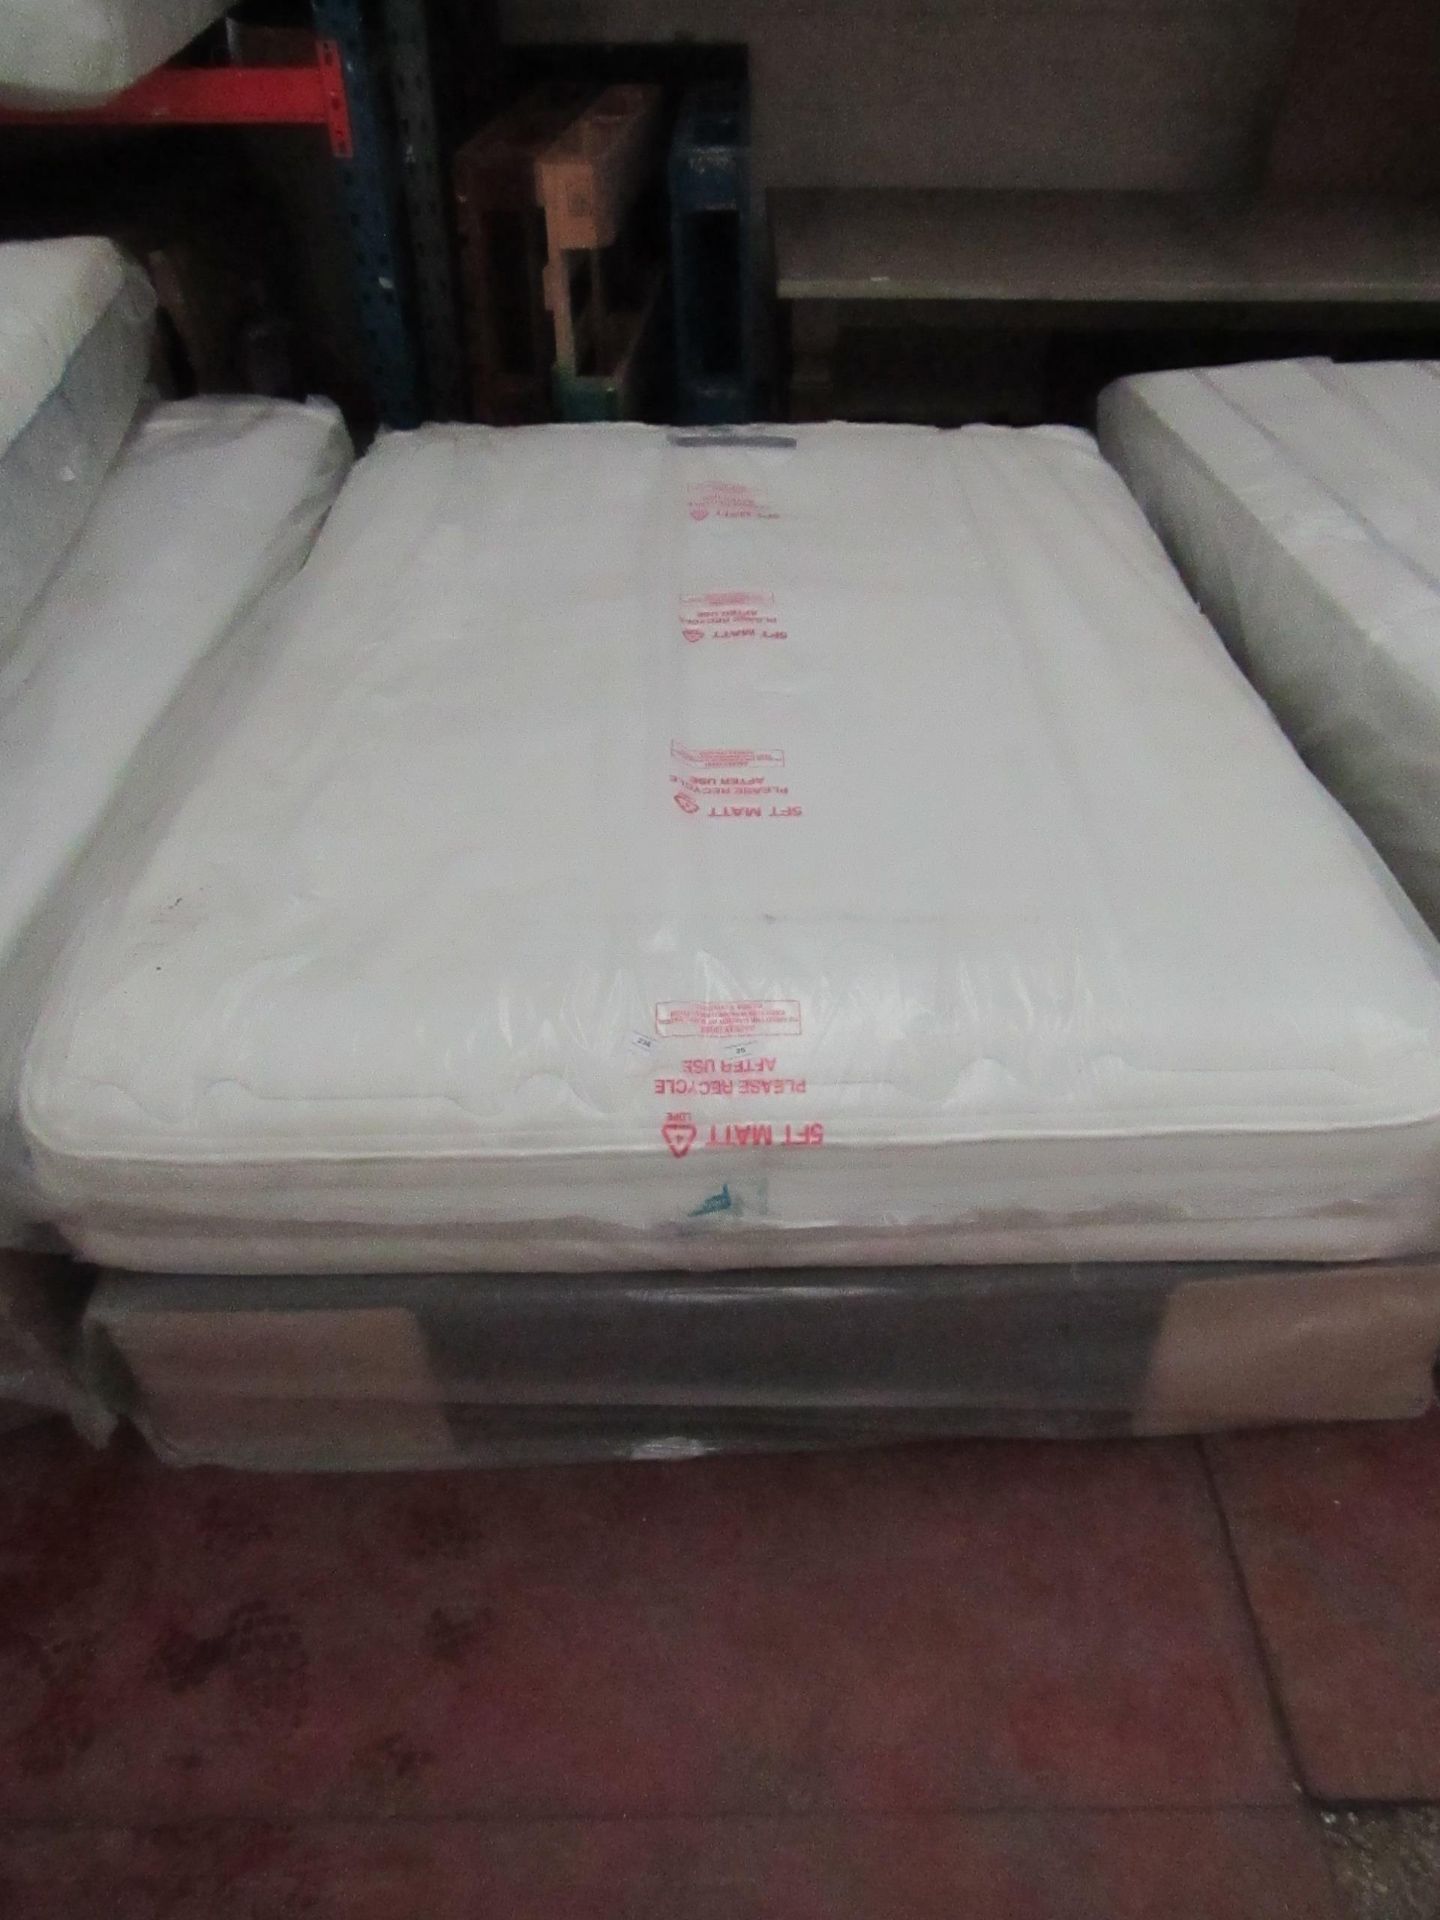 Silent night Kingsize mattress with divan base, ex-display so item may contain a few marks etc.